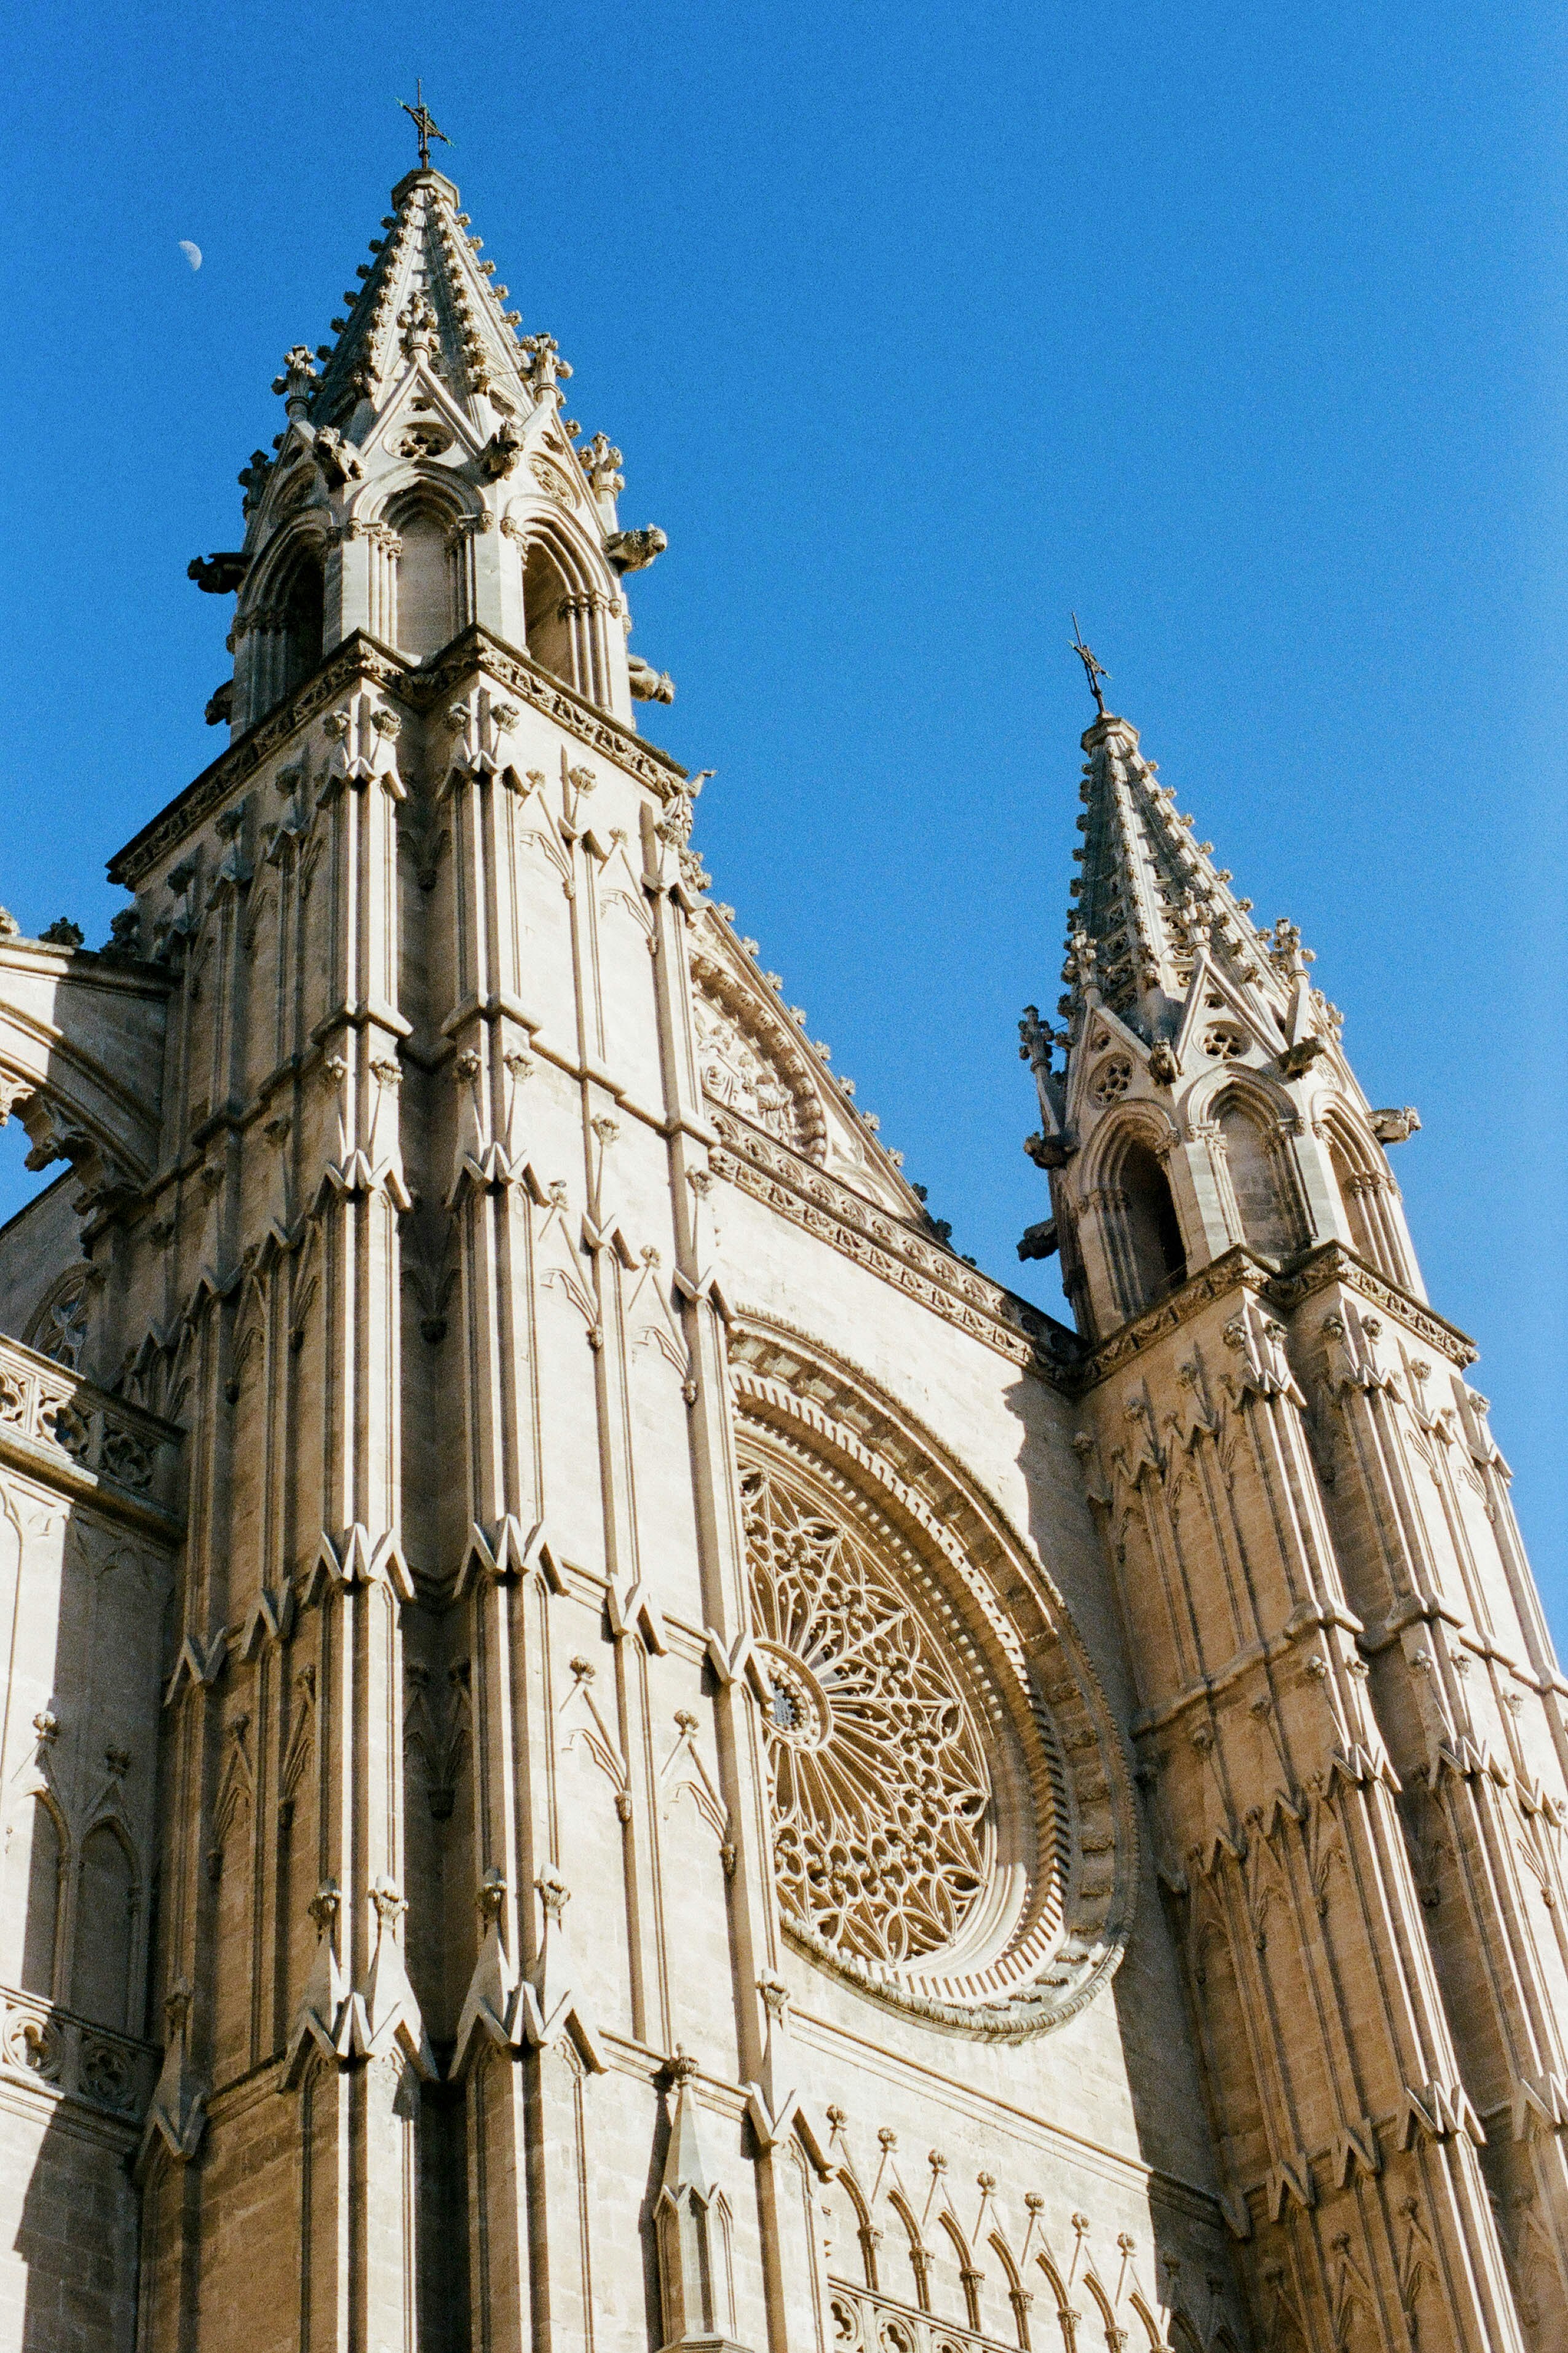 View of Palma de Mallorca Cathedral with a blue sky